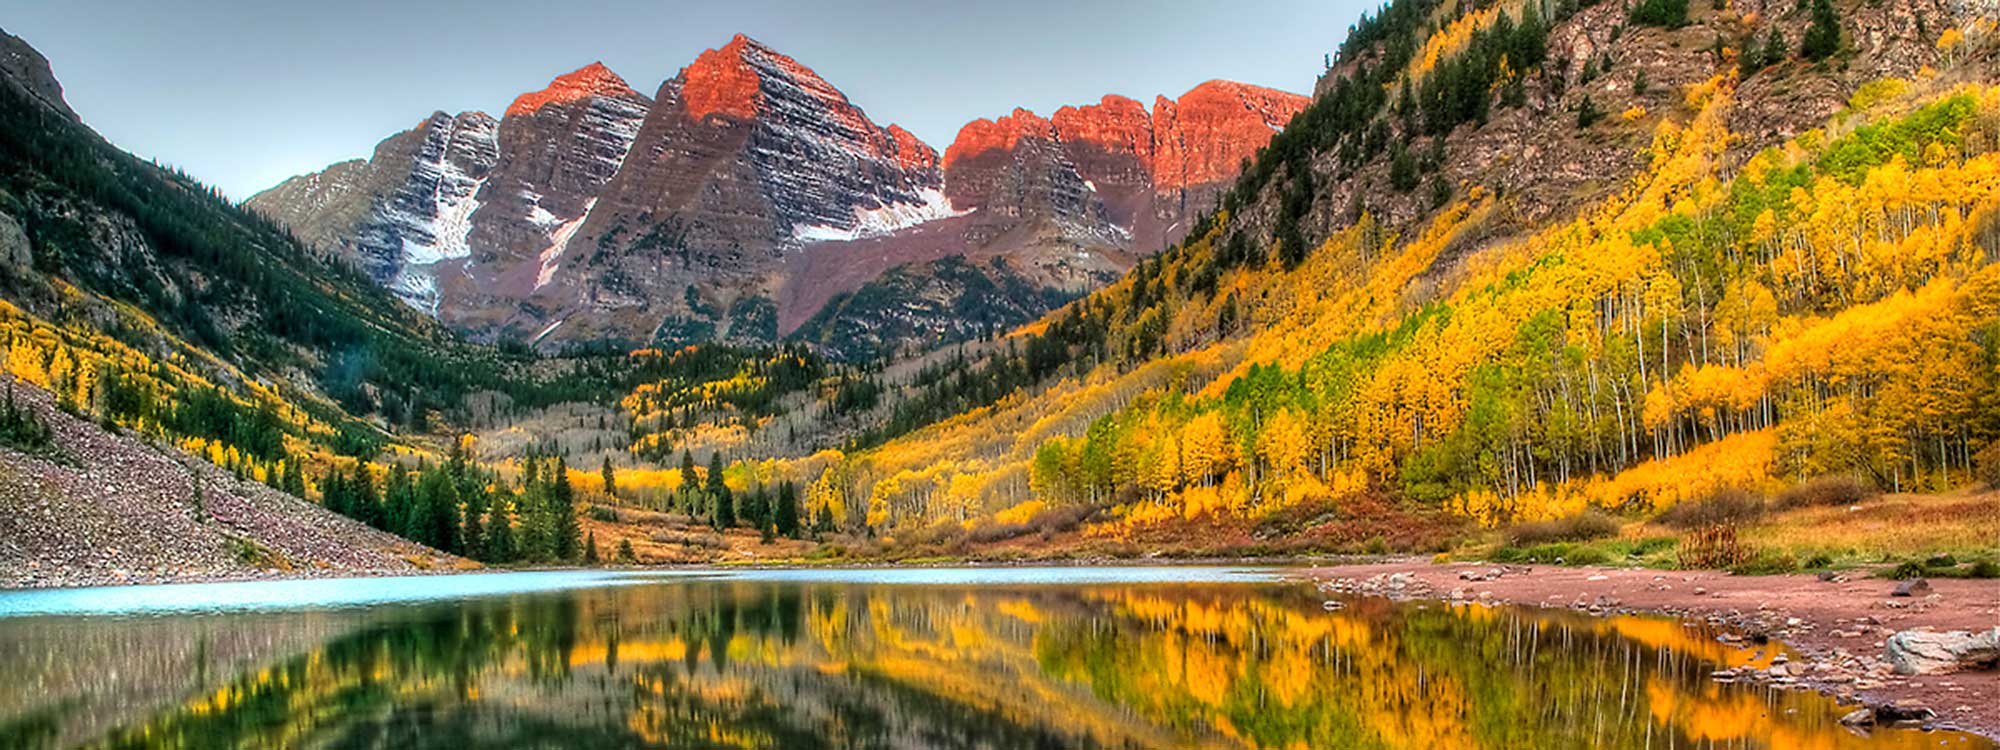 Crater lake and Maroon Bells